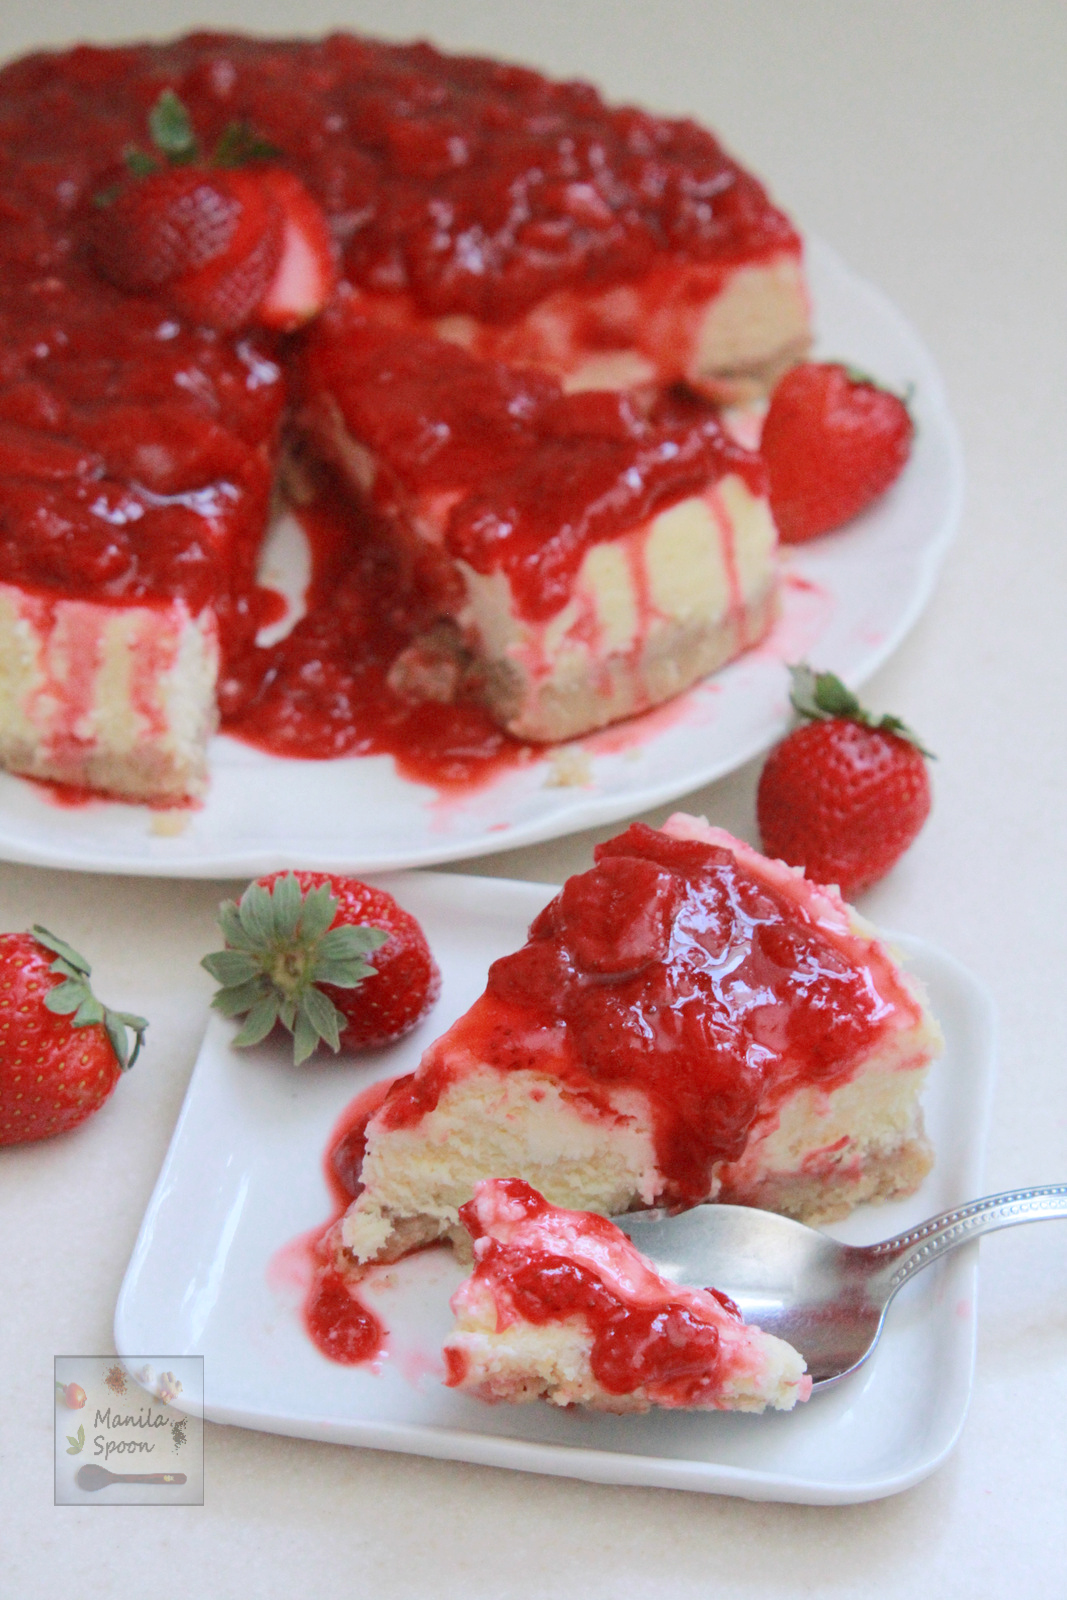 Deliciously creamy and fruity cheesecake with a luscious sweet-tangy strawberry sauce that brings this dessert over the top. Best way to welcome Spring!